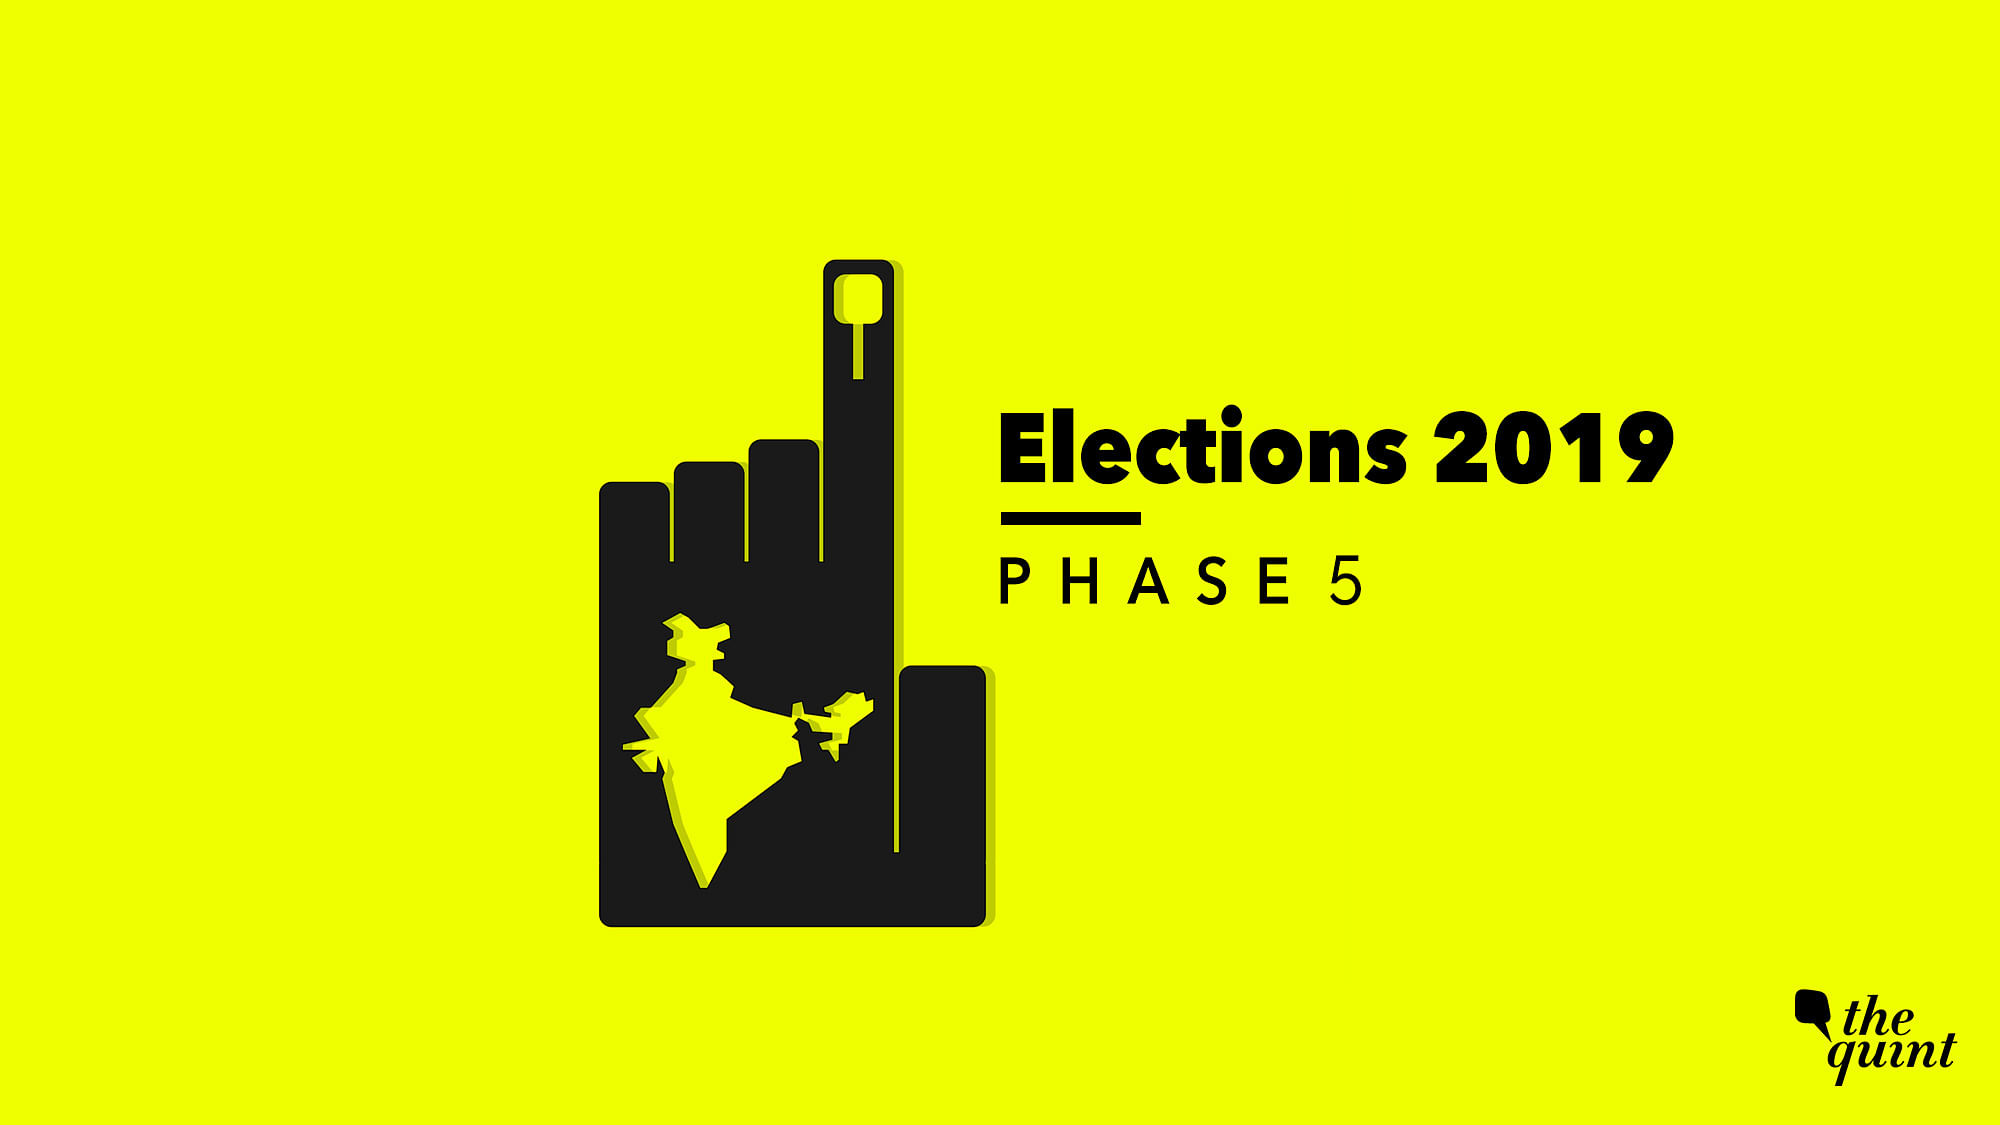 A total of 51 constituencies in 12 states and 1 union territory will vote in the fifth phase of the Lok Sabha polls on Monday, 6 May 2019.